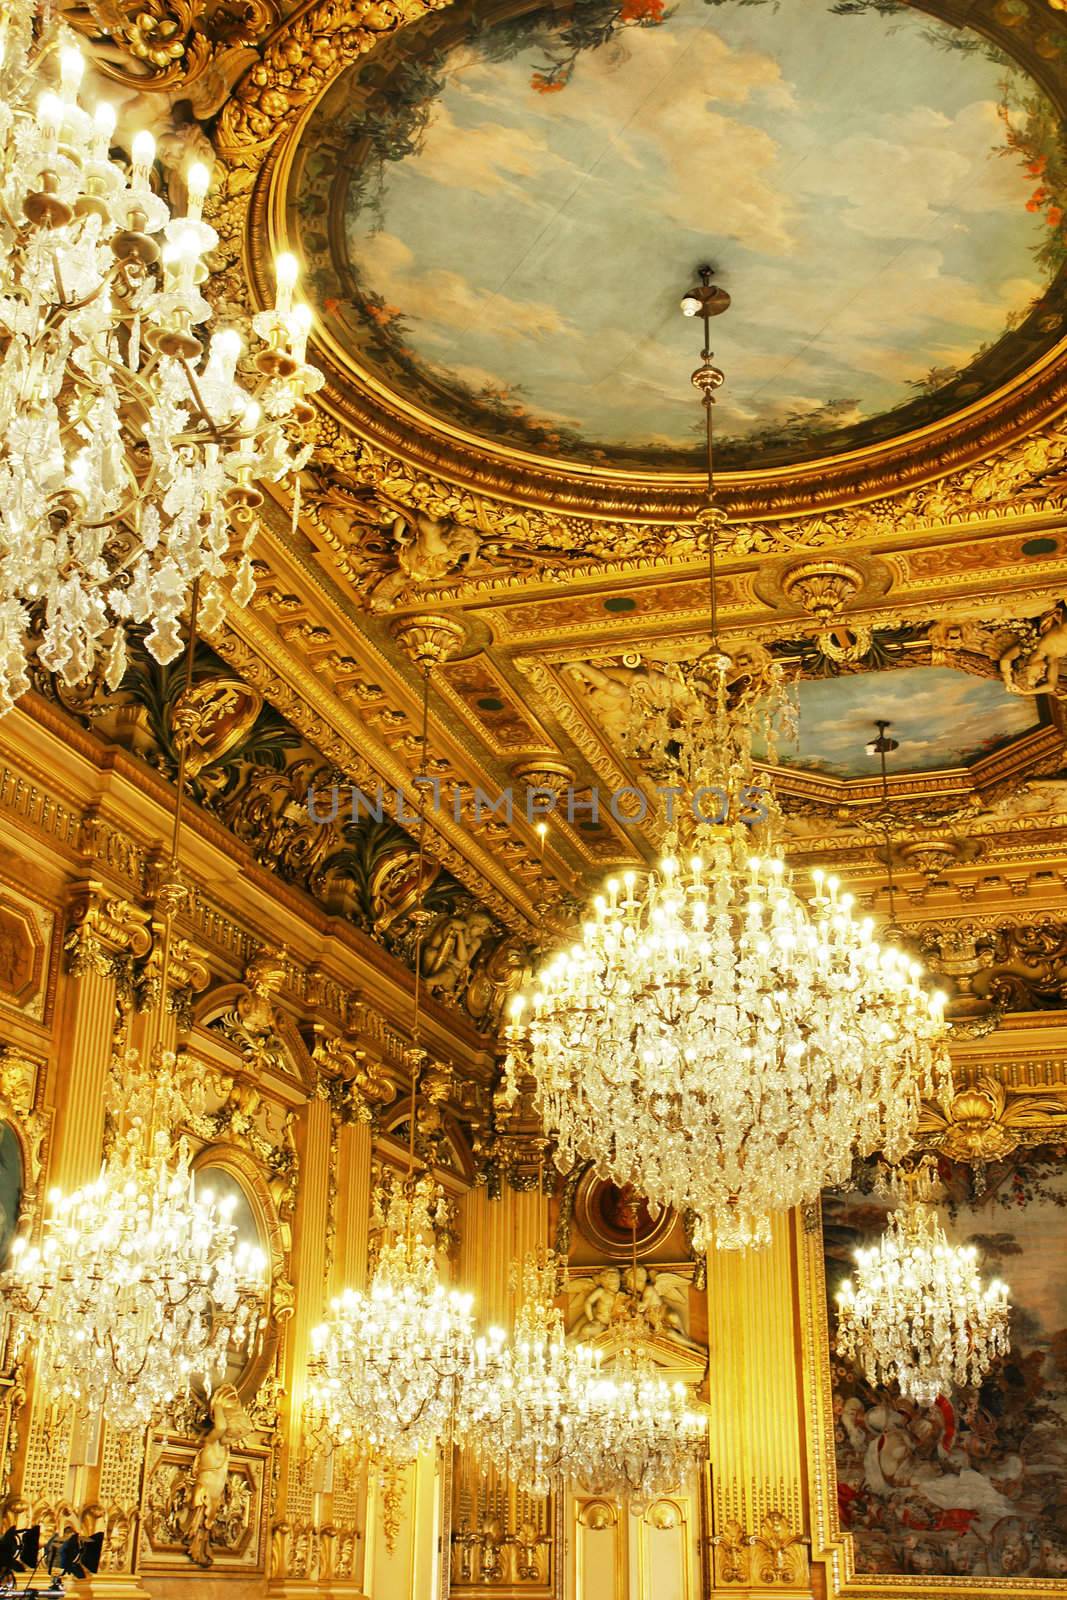 Gold ceiling and chandeliers by Mirage3